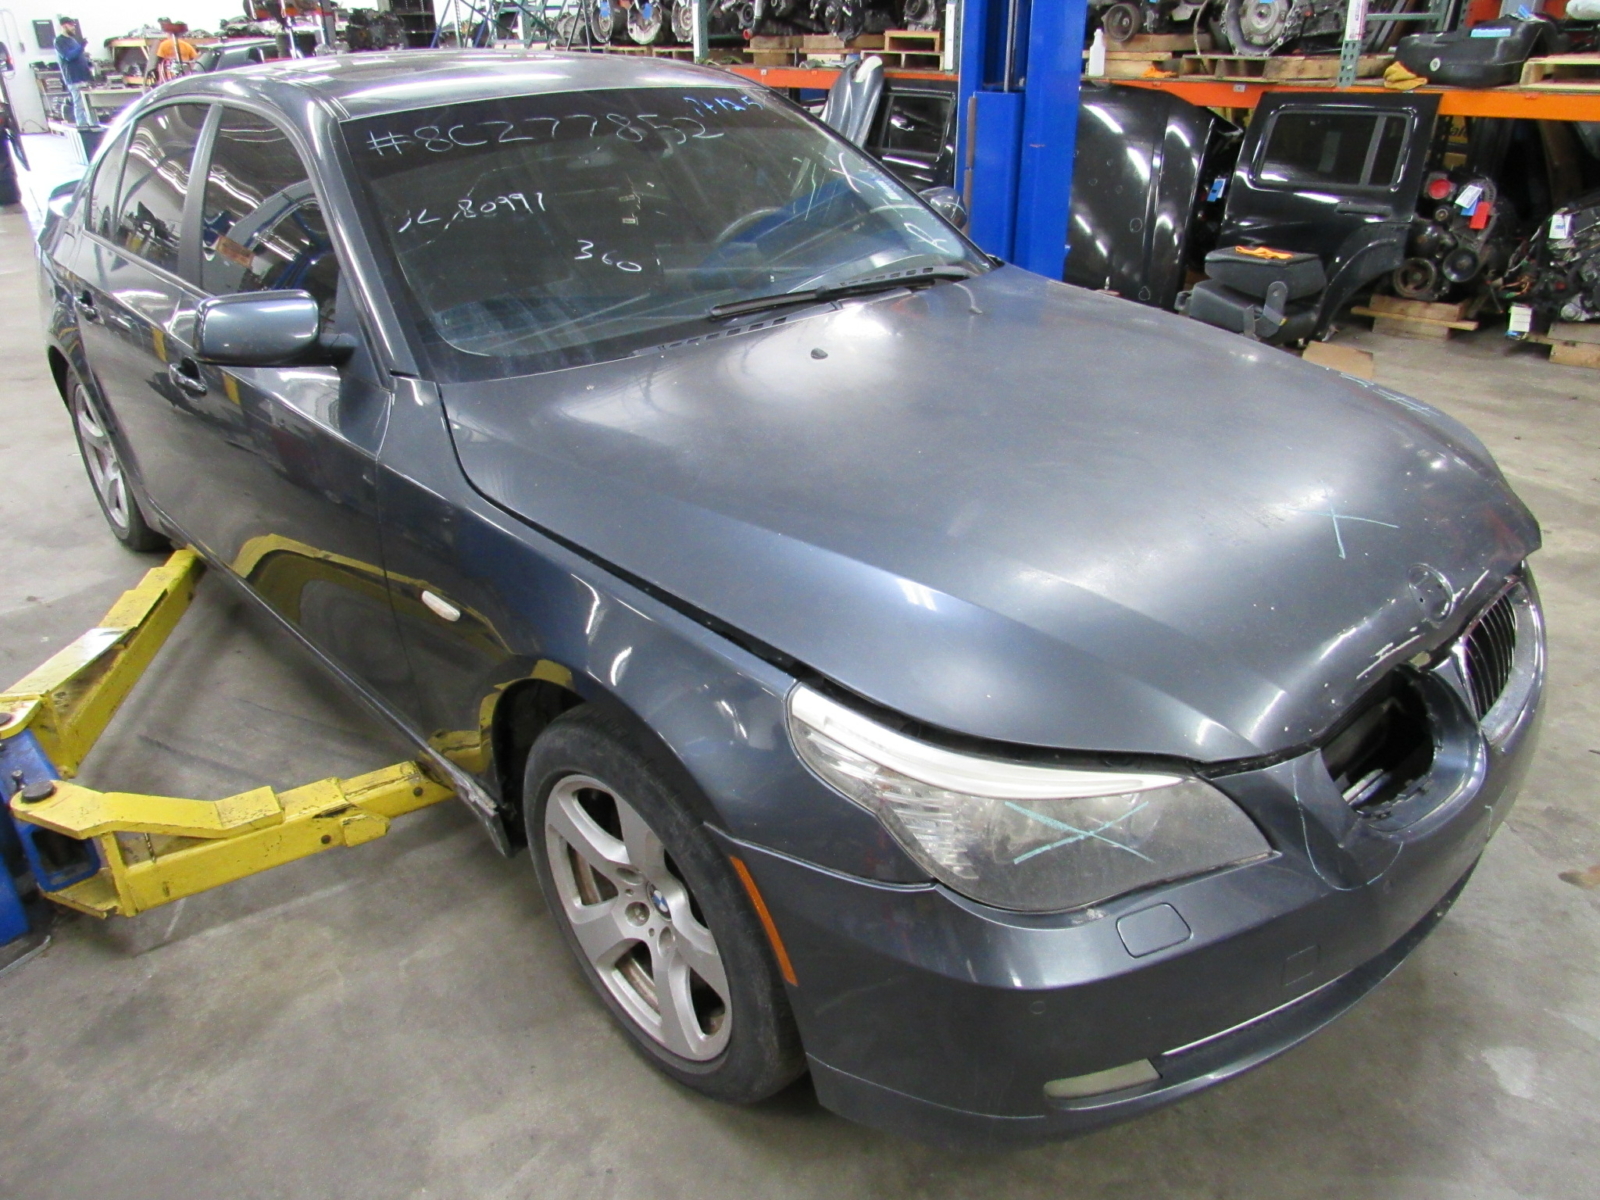 08 BMW 535i RWD E60 N54 Runs Great! In for Parts 5-2-23